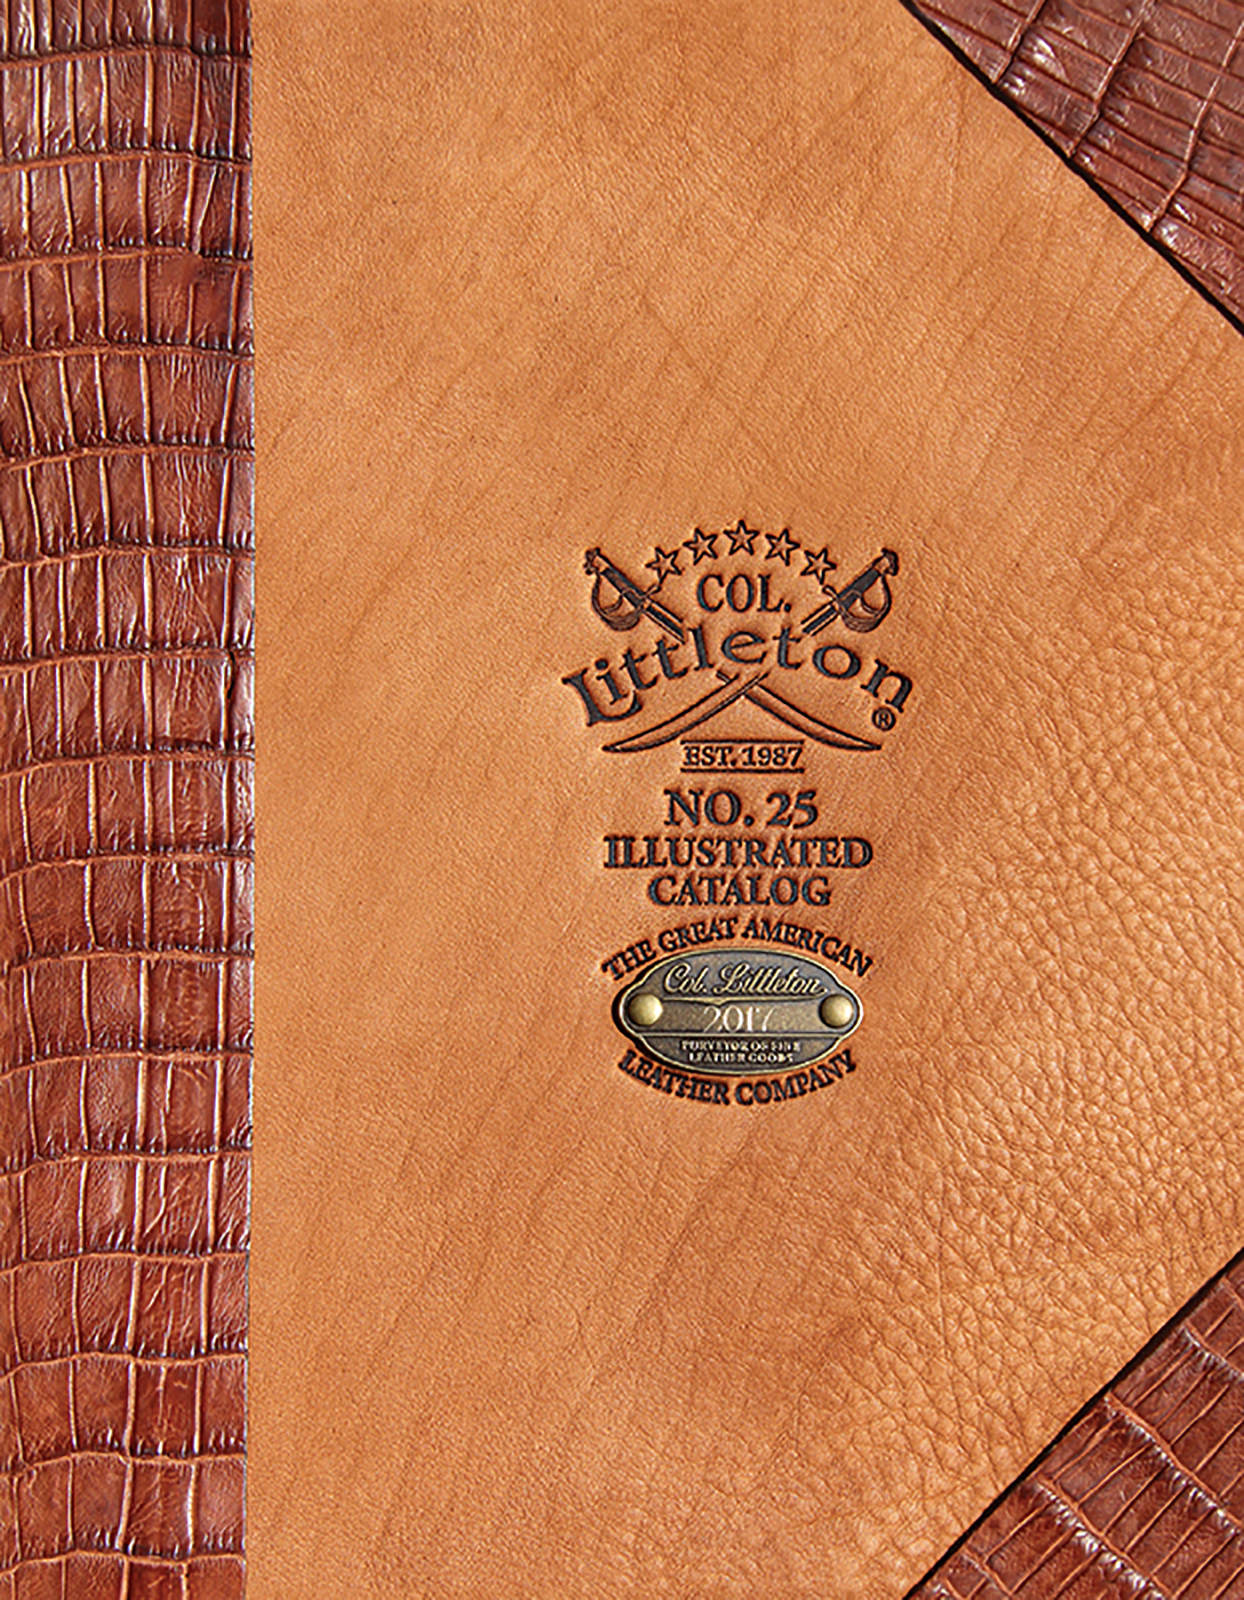 The 2017 Colonel Littleton Catalog cover, made of a saddletan hide stamped with the logo and trimmed with alligator along the spine and in two corner.